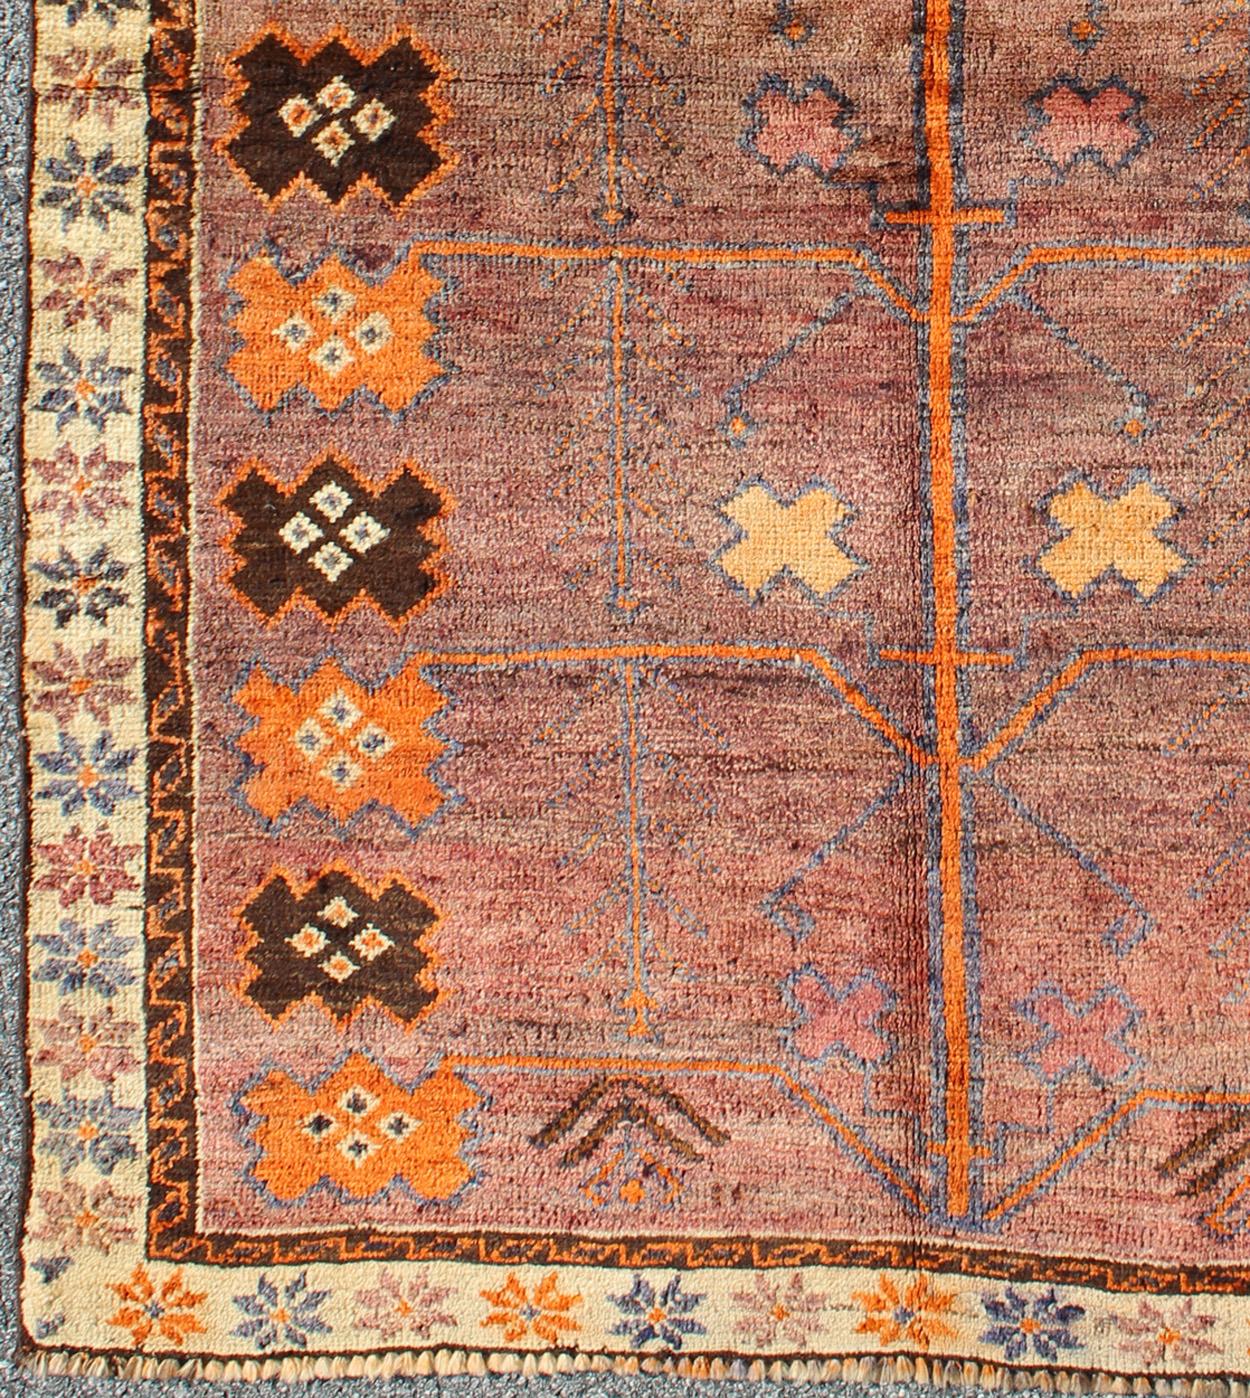 Vintage Persian Gabbeh rug with variegated purple central field and tribal motifs, rug h-1306-27, country of origin / type: Iran / Gabbeh, circa 1960

This high-pile mid-20th century vintage Persian Gabbeh carpet consists of various tribal motifs